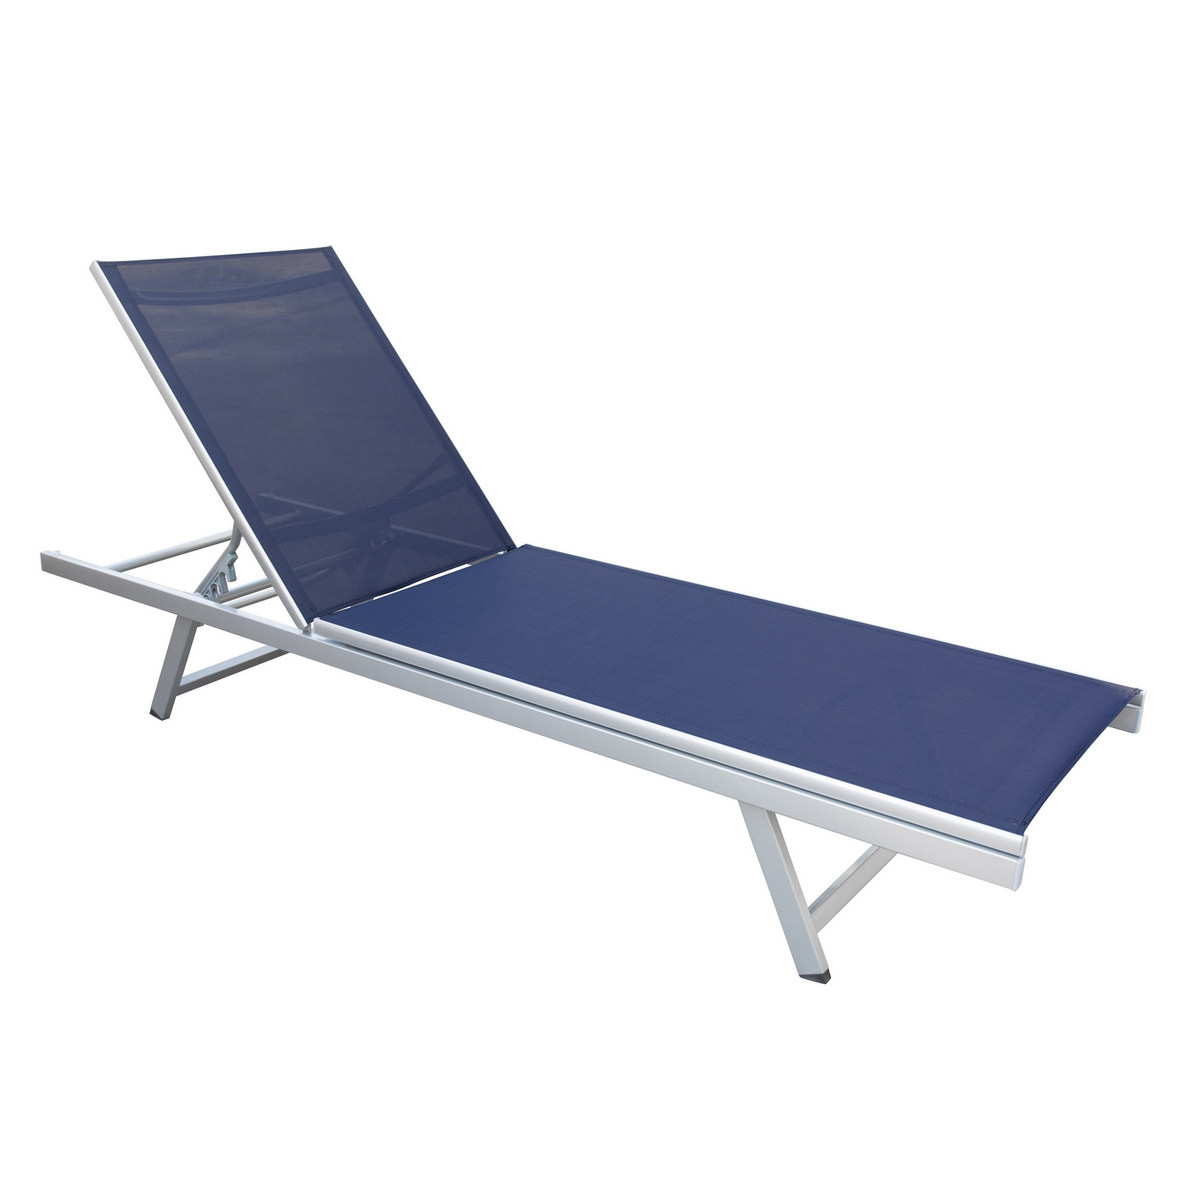 Corliving Pjr-329-r Gallant Weather Resistant Navy Blue Mesh Reclining Patio Lounger